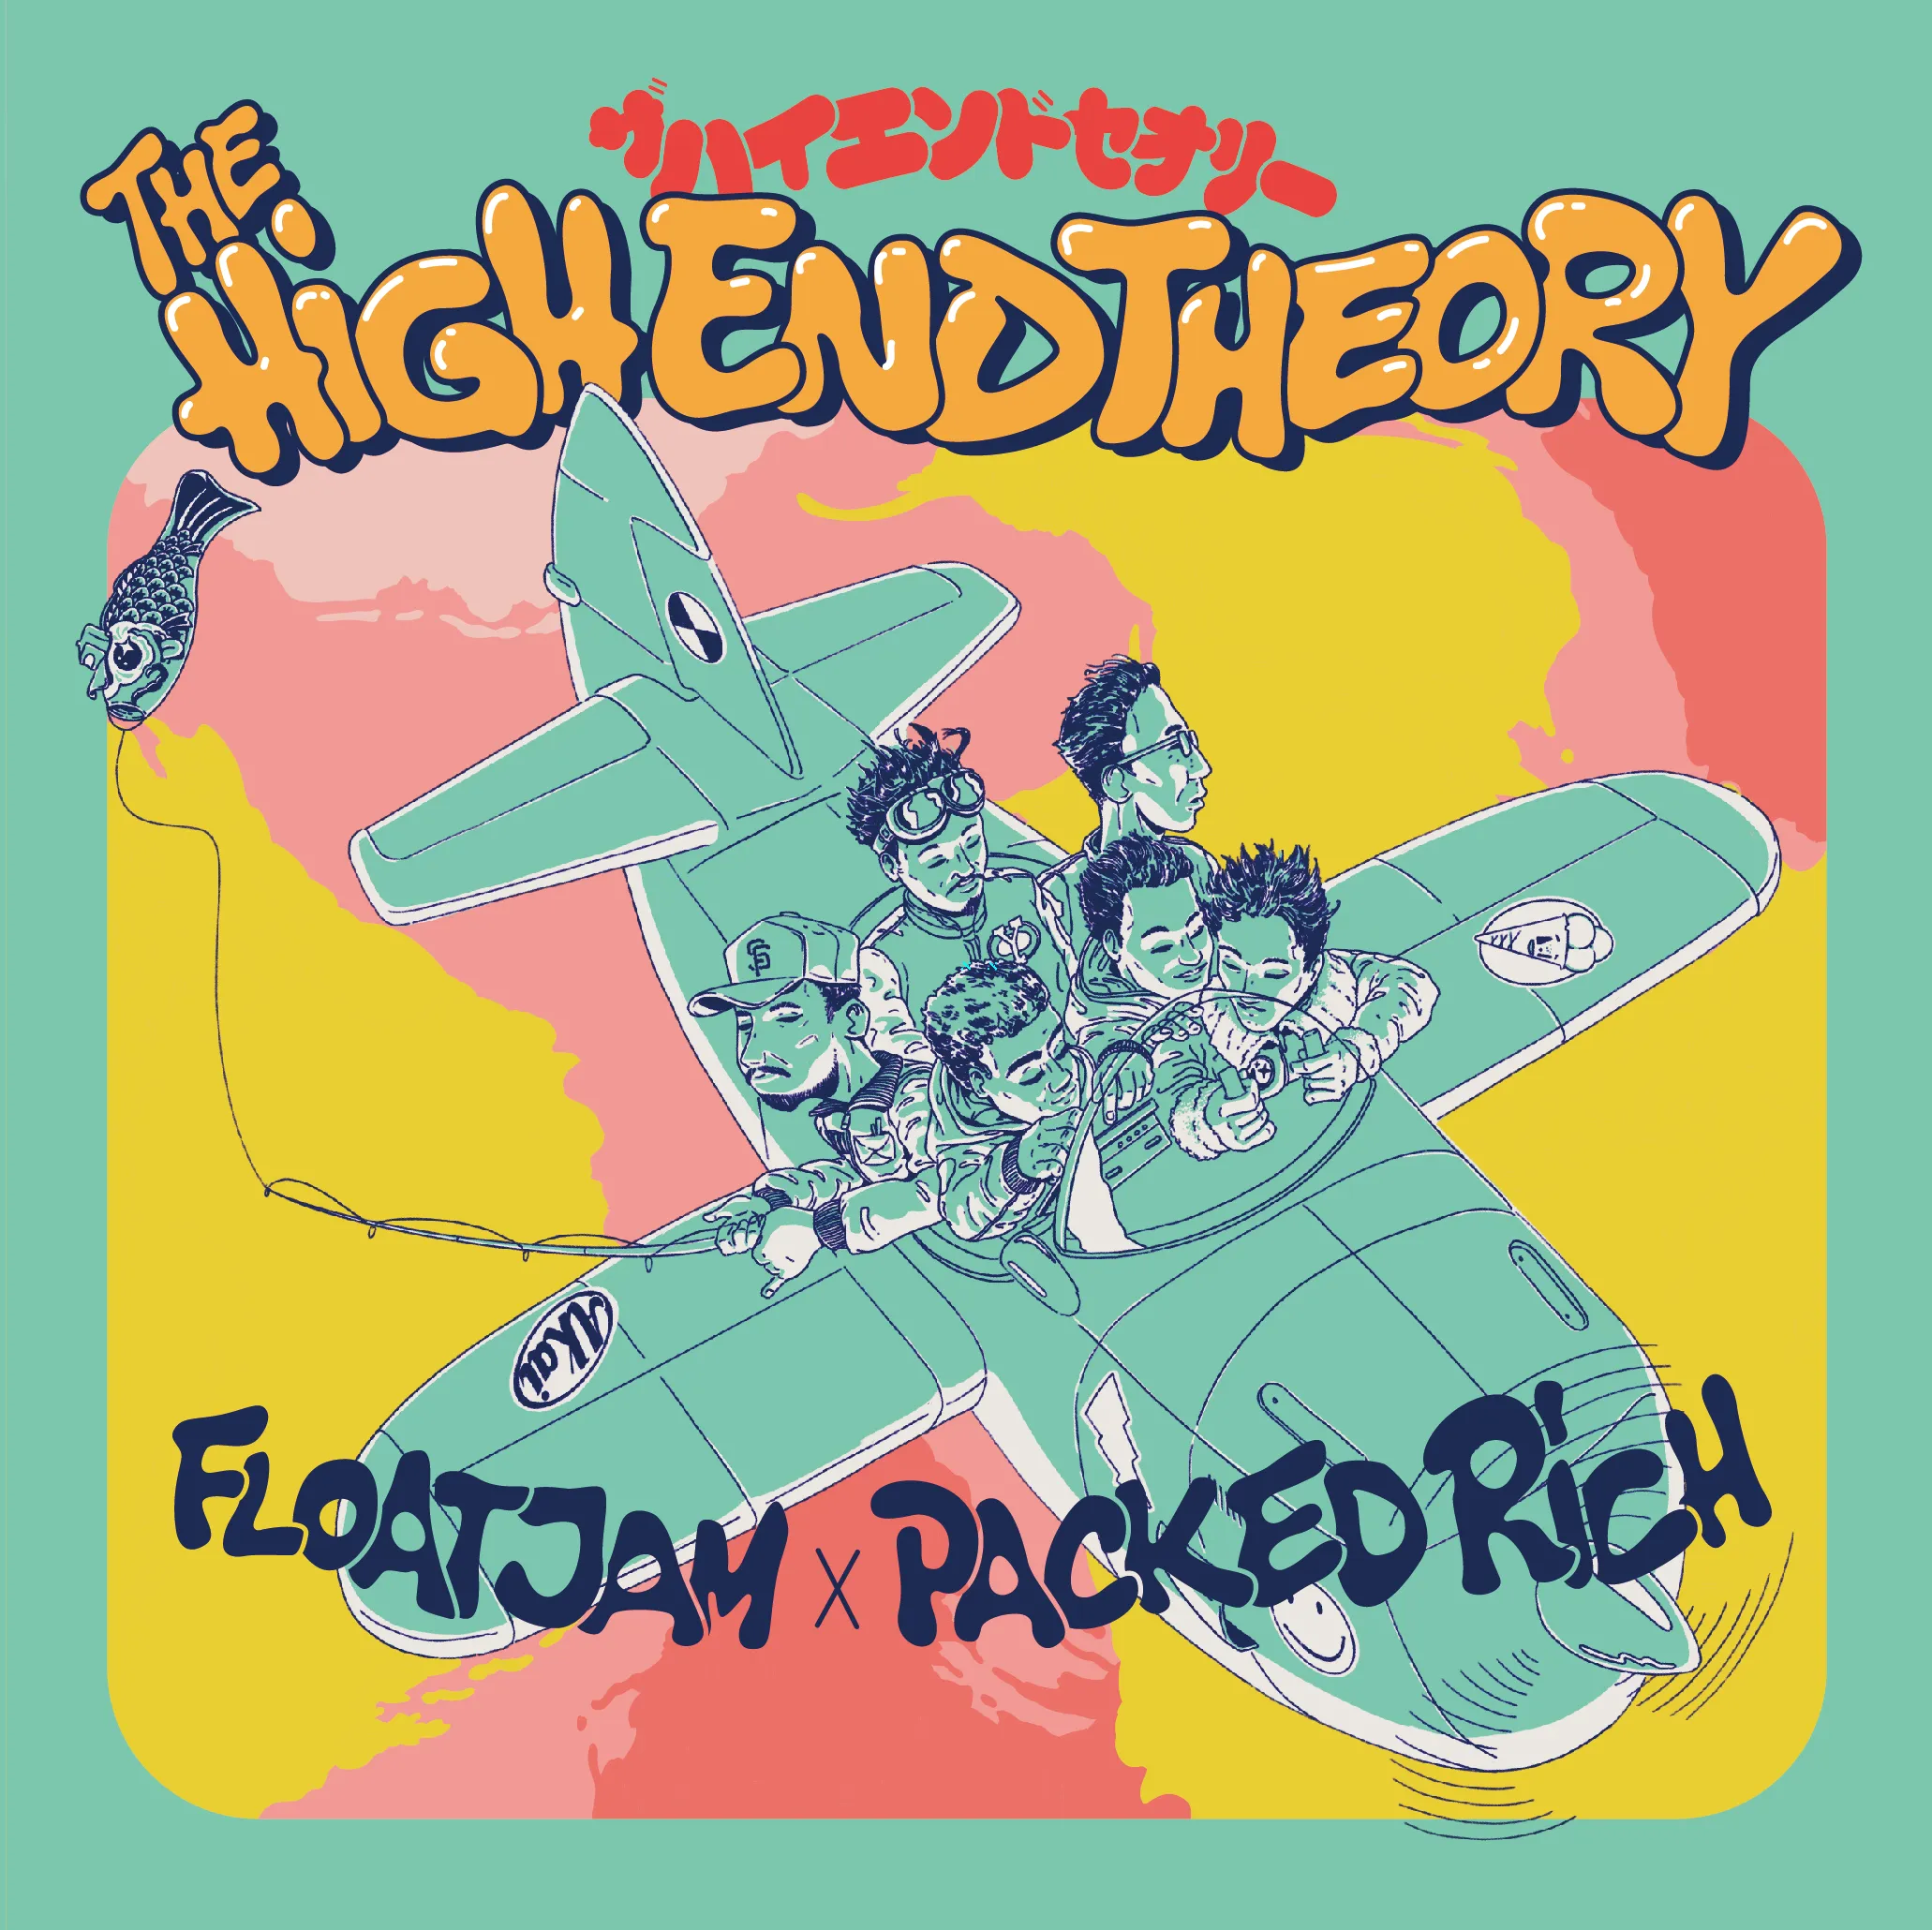 FLOAT JAM × PACKED RICH / HIGH END THEORY [7inch - DBLS-004